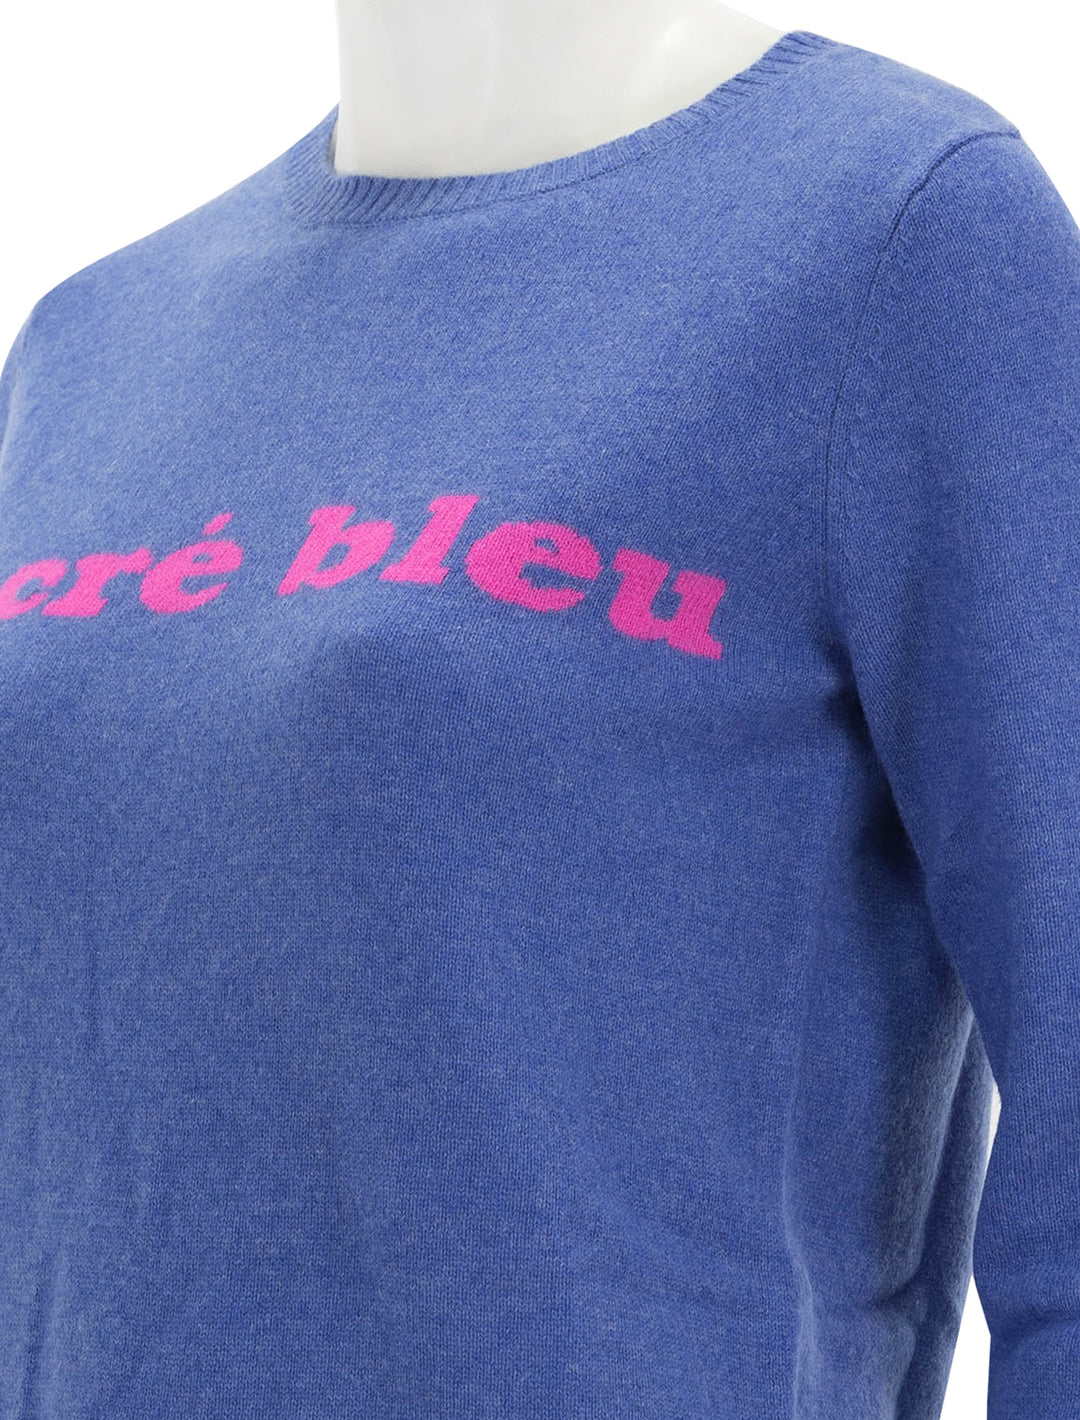 Close-up view of Jumper 1234's sacre bleu crew in periwinkle and hot pink.